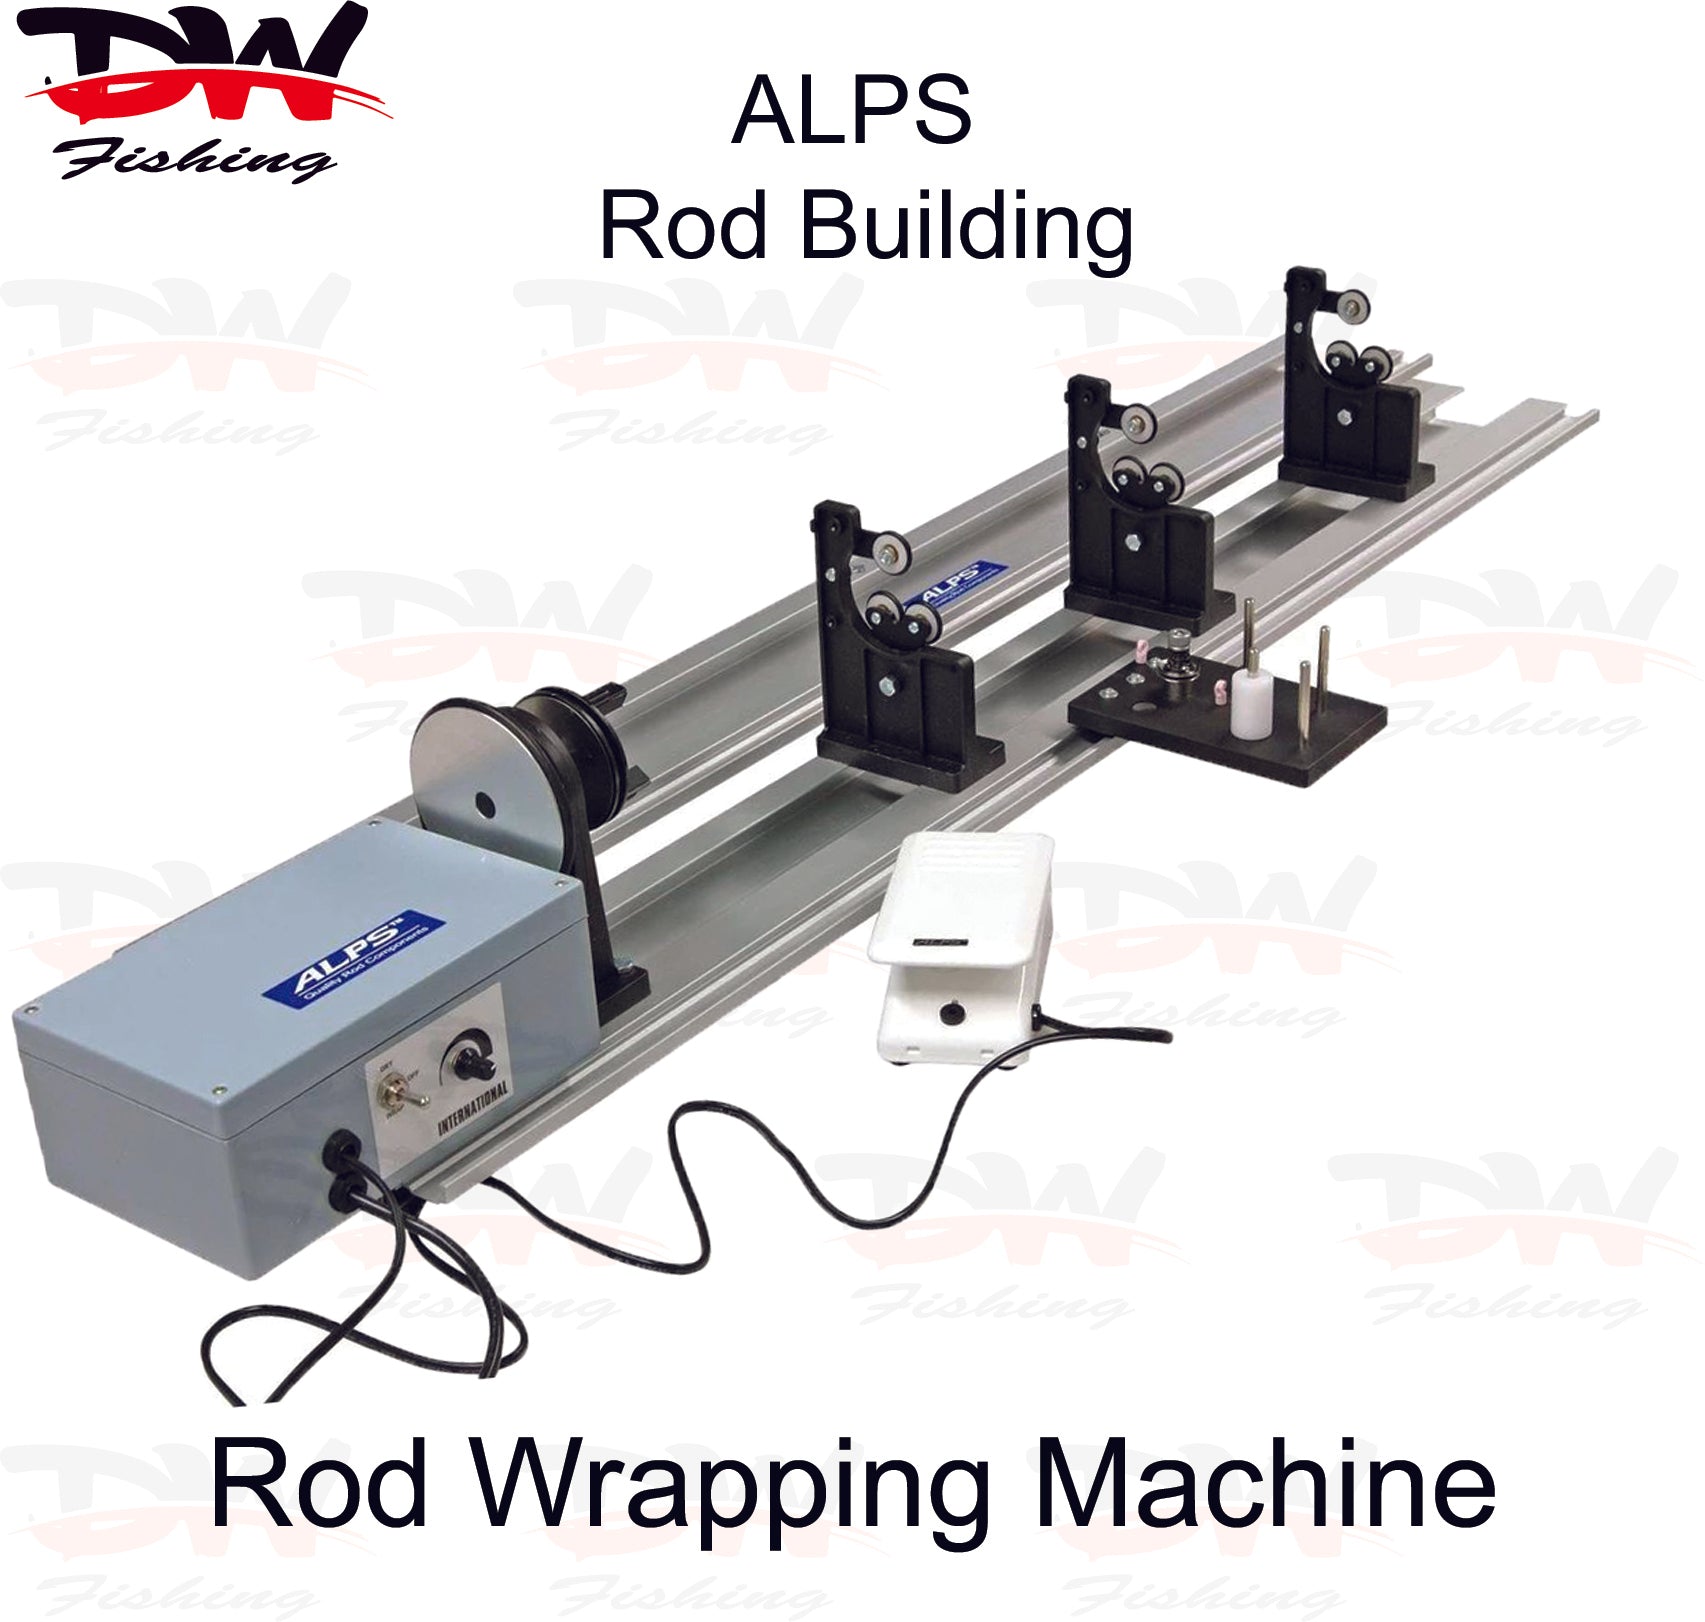 ALPS Rod Wrapping Machine